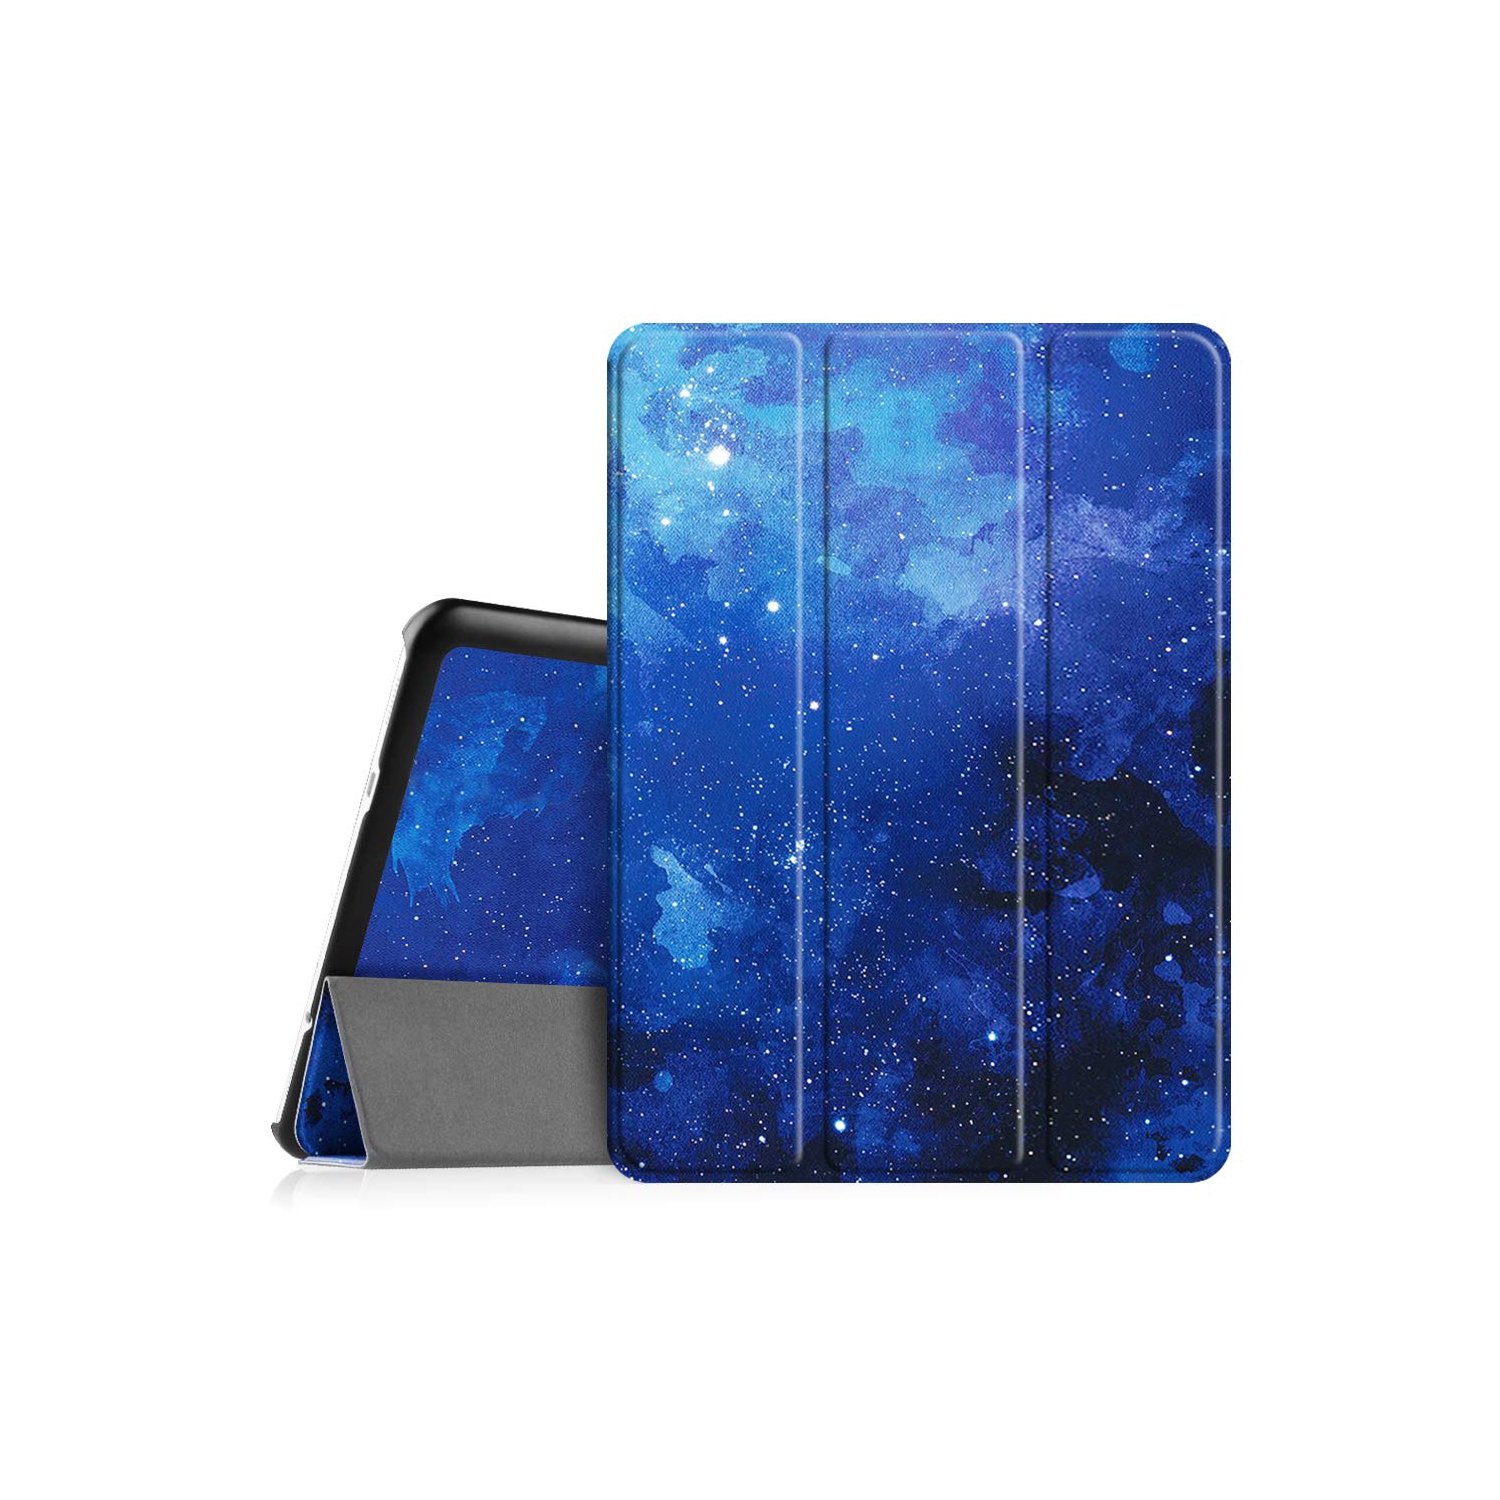 Fintie Slim Shell Case for Samsung Galaxy Tab S2 9.7 - Ultra Lightweight Protective Stand Cover with Auto Sleep/Wake Feature for Samsung Galaxy Tab S2 9.7 Inch Tablet, Starry Sky